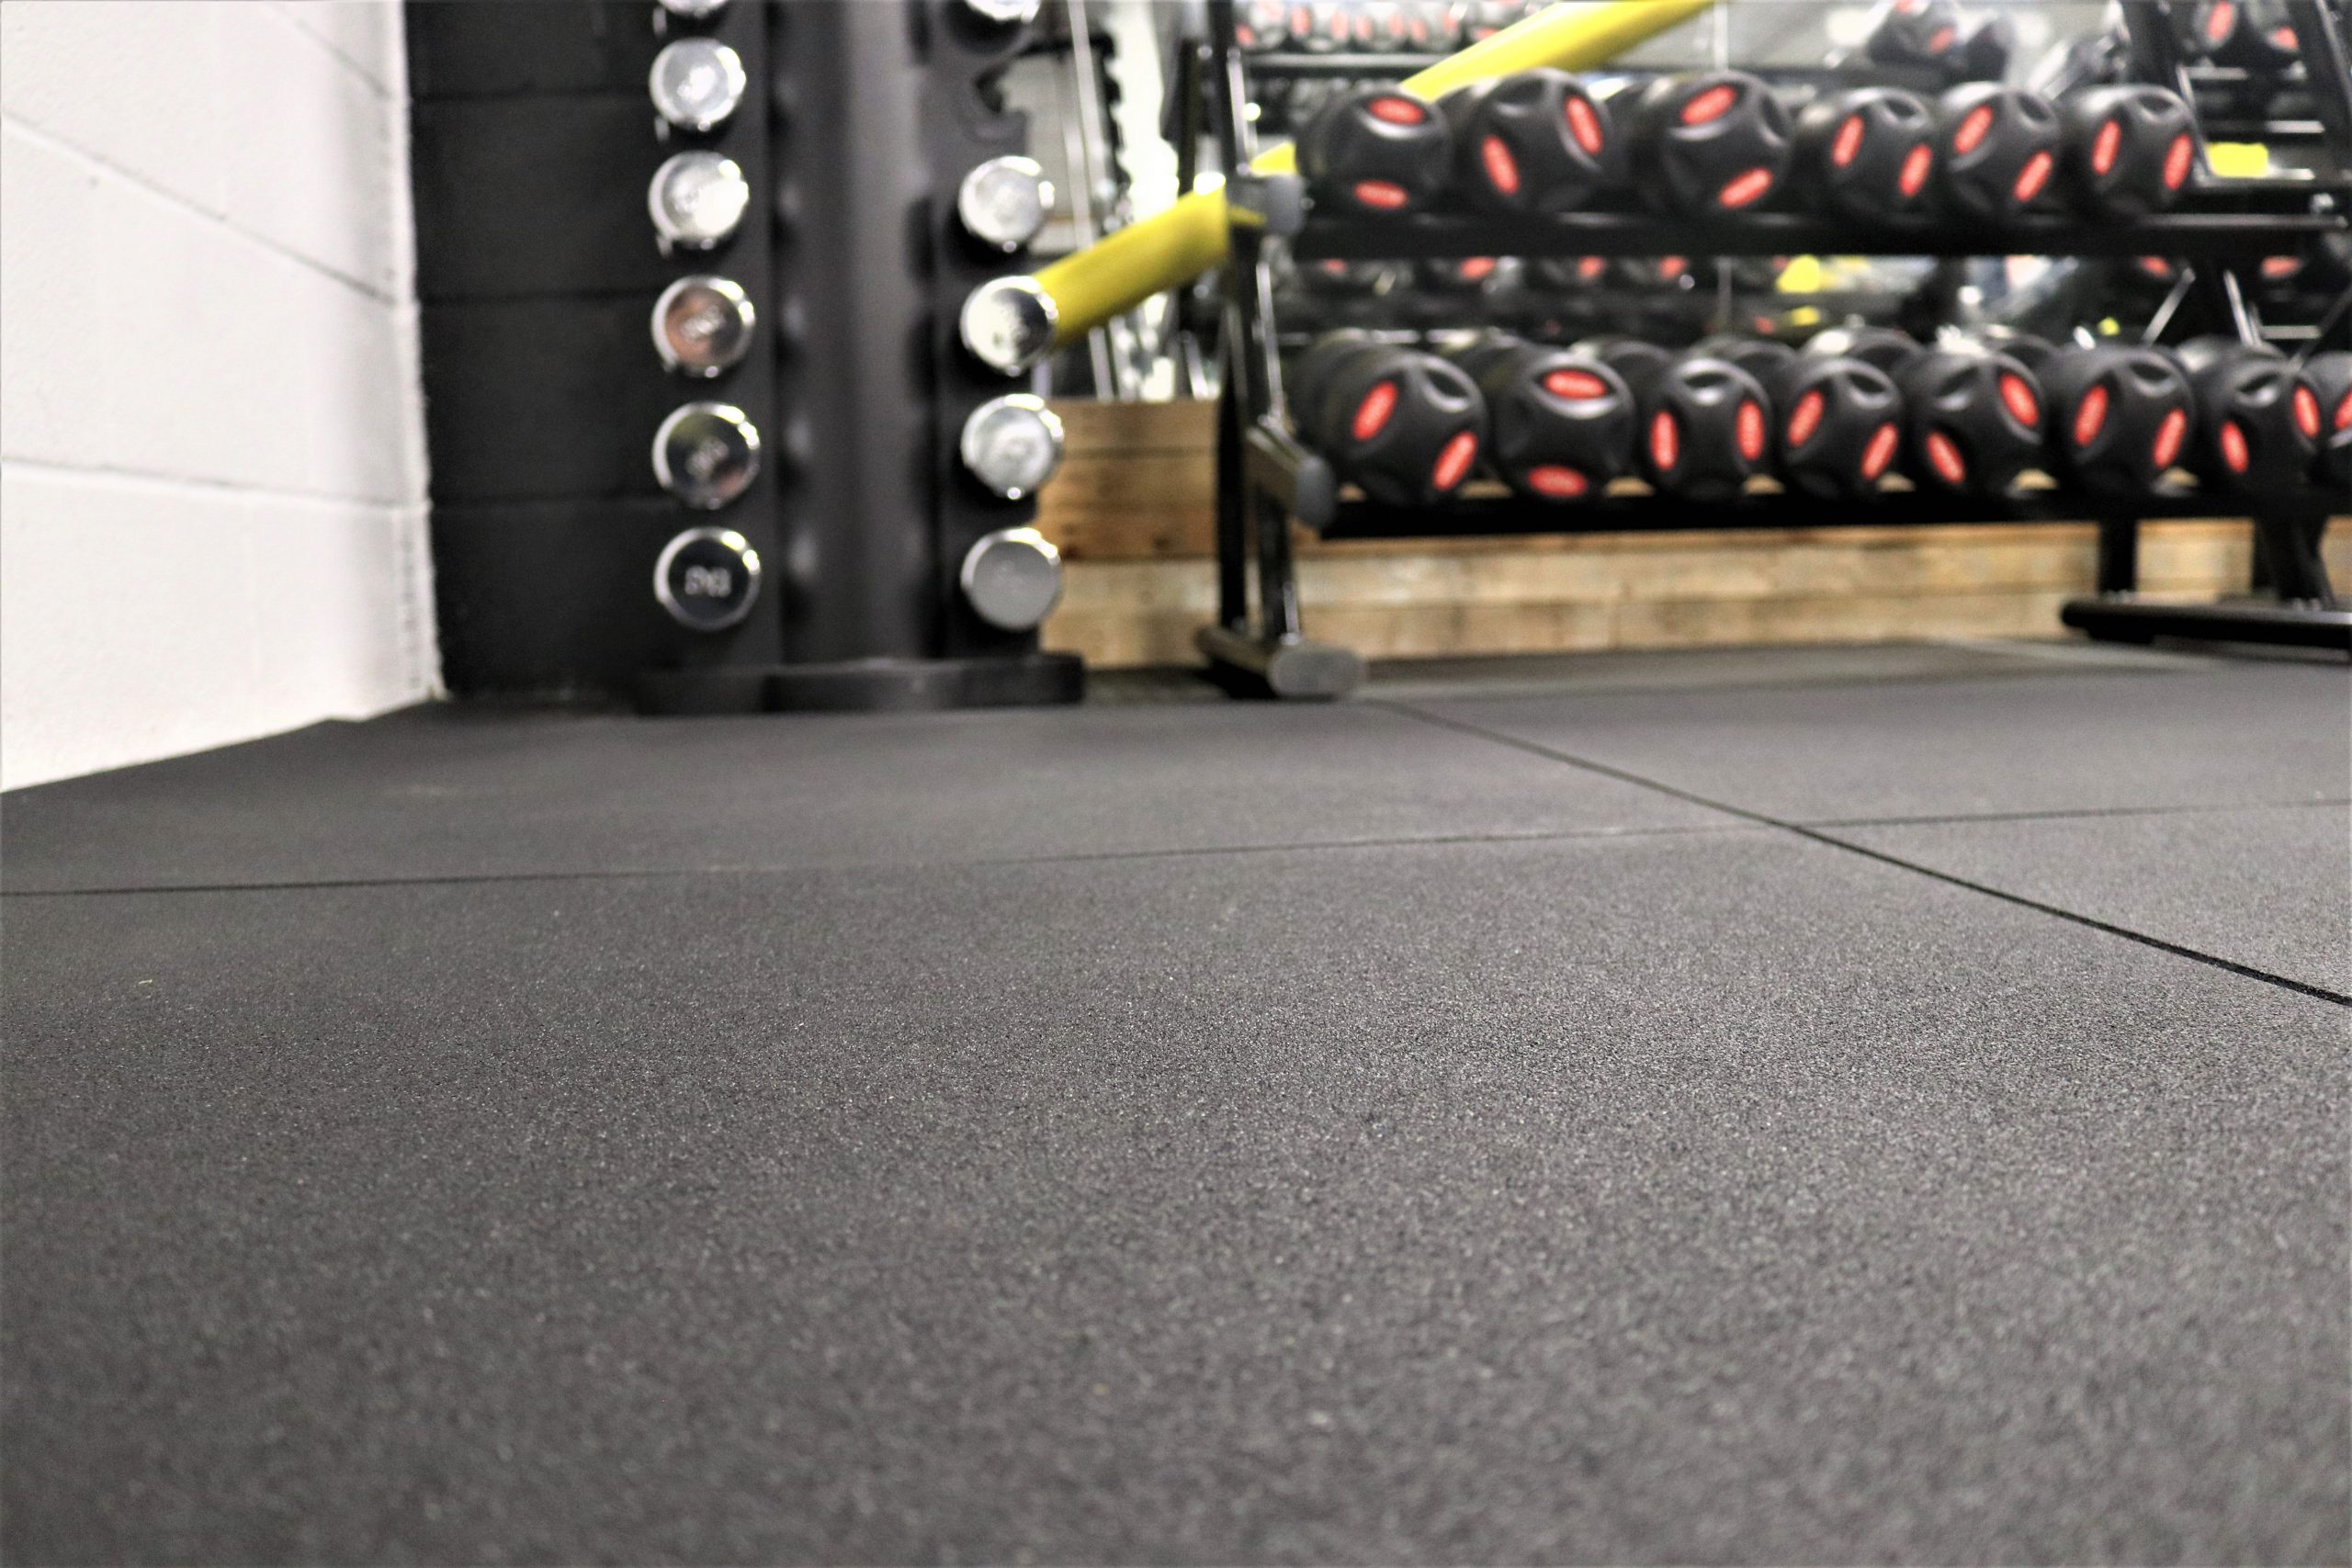 Rubber Flooring Gym Tiles 1m X 1m X 20mm Natural Rubber Mats Crossfit Weights Fitness Perfect For Home Or Commercial Gyms Epic Mats